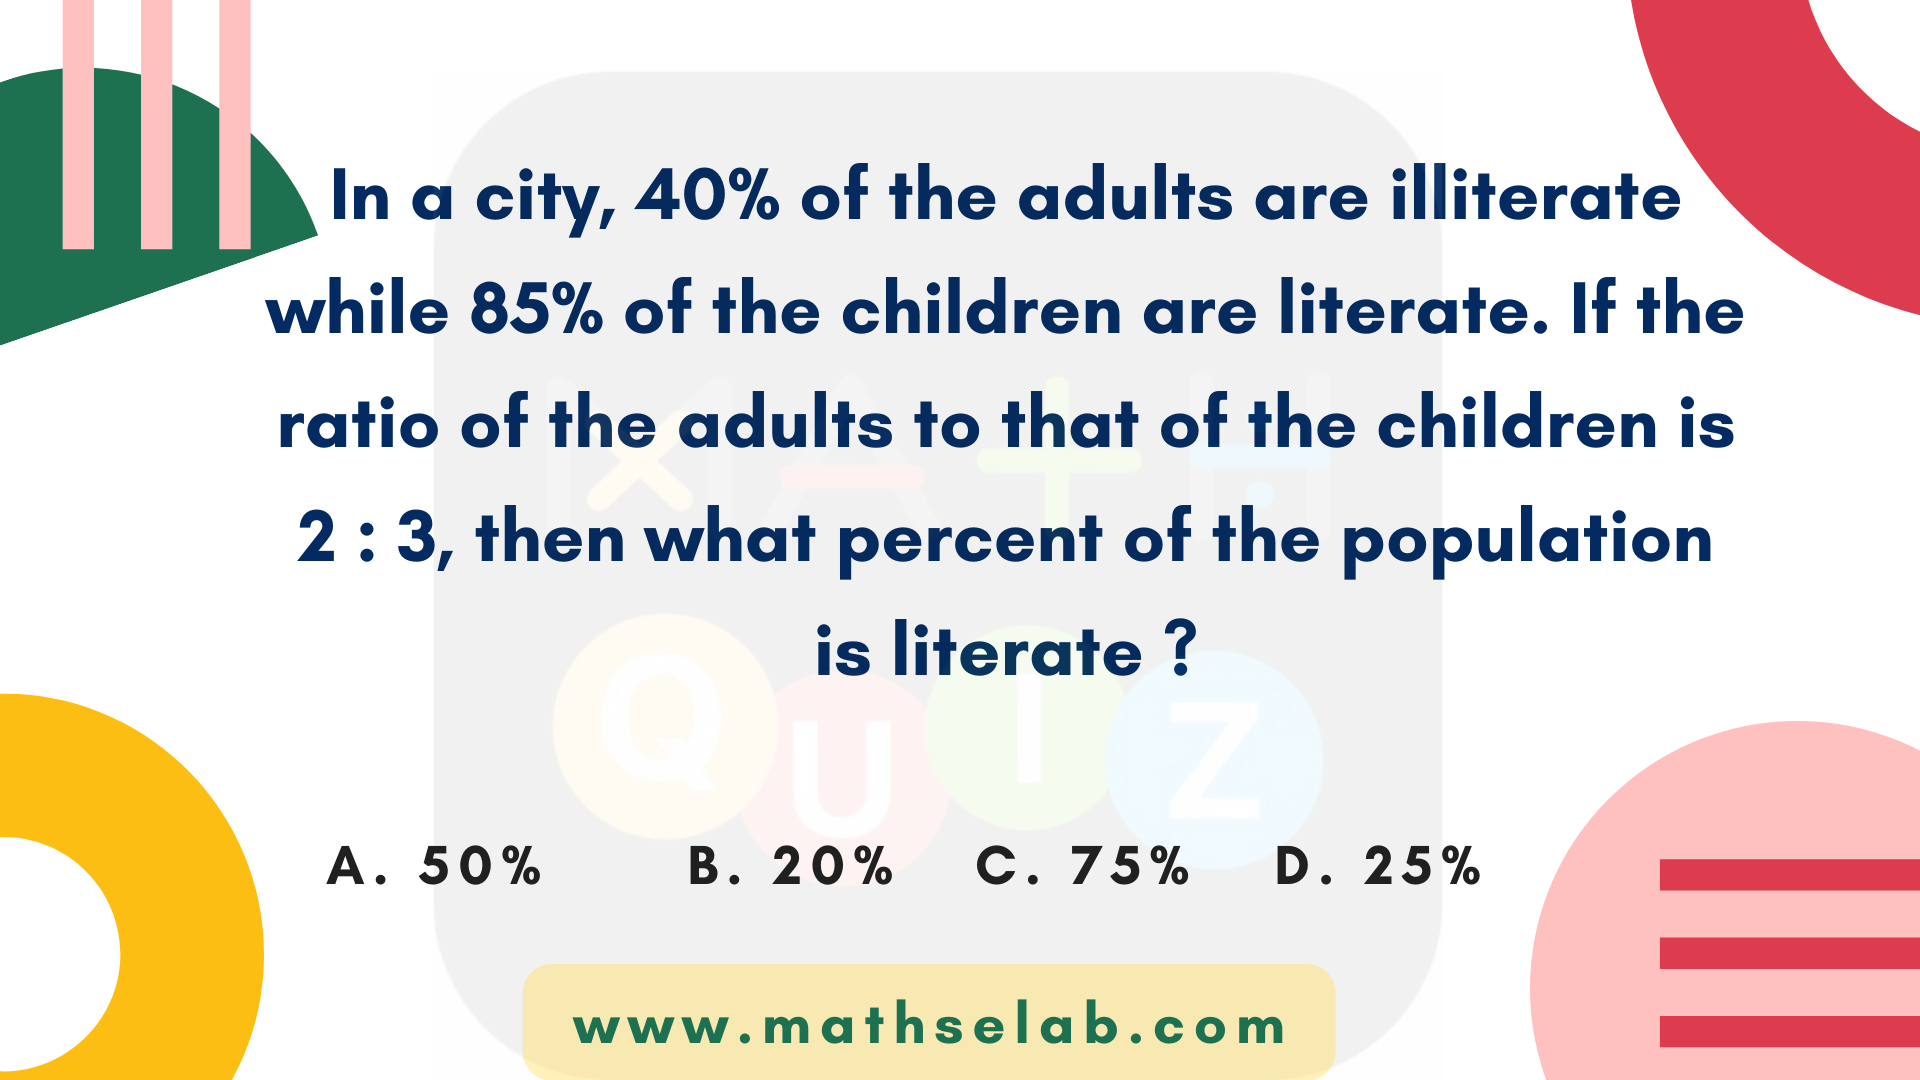 In a city, 40% of the adults are illiterate while 85% of the children are literate. If the ratio of the adults to that of the children is 2 3, percent of the population is literate - www.mathselab.com